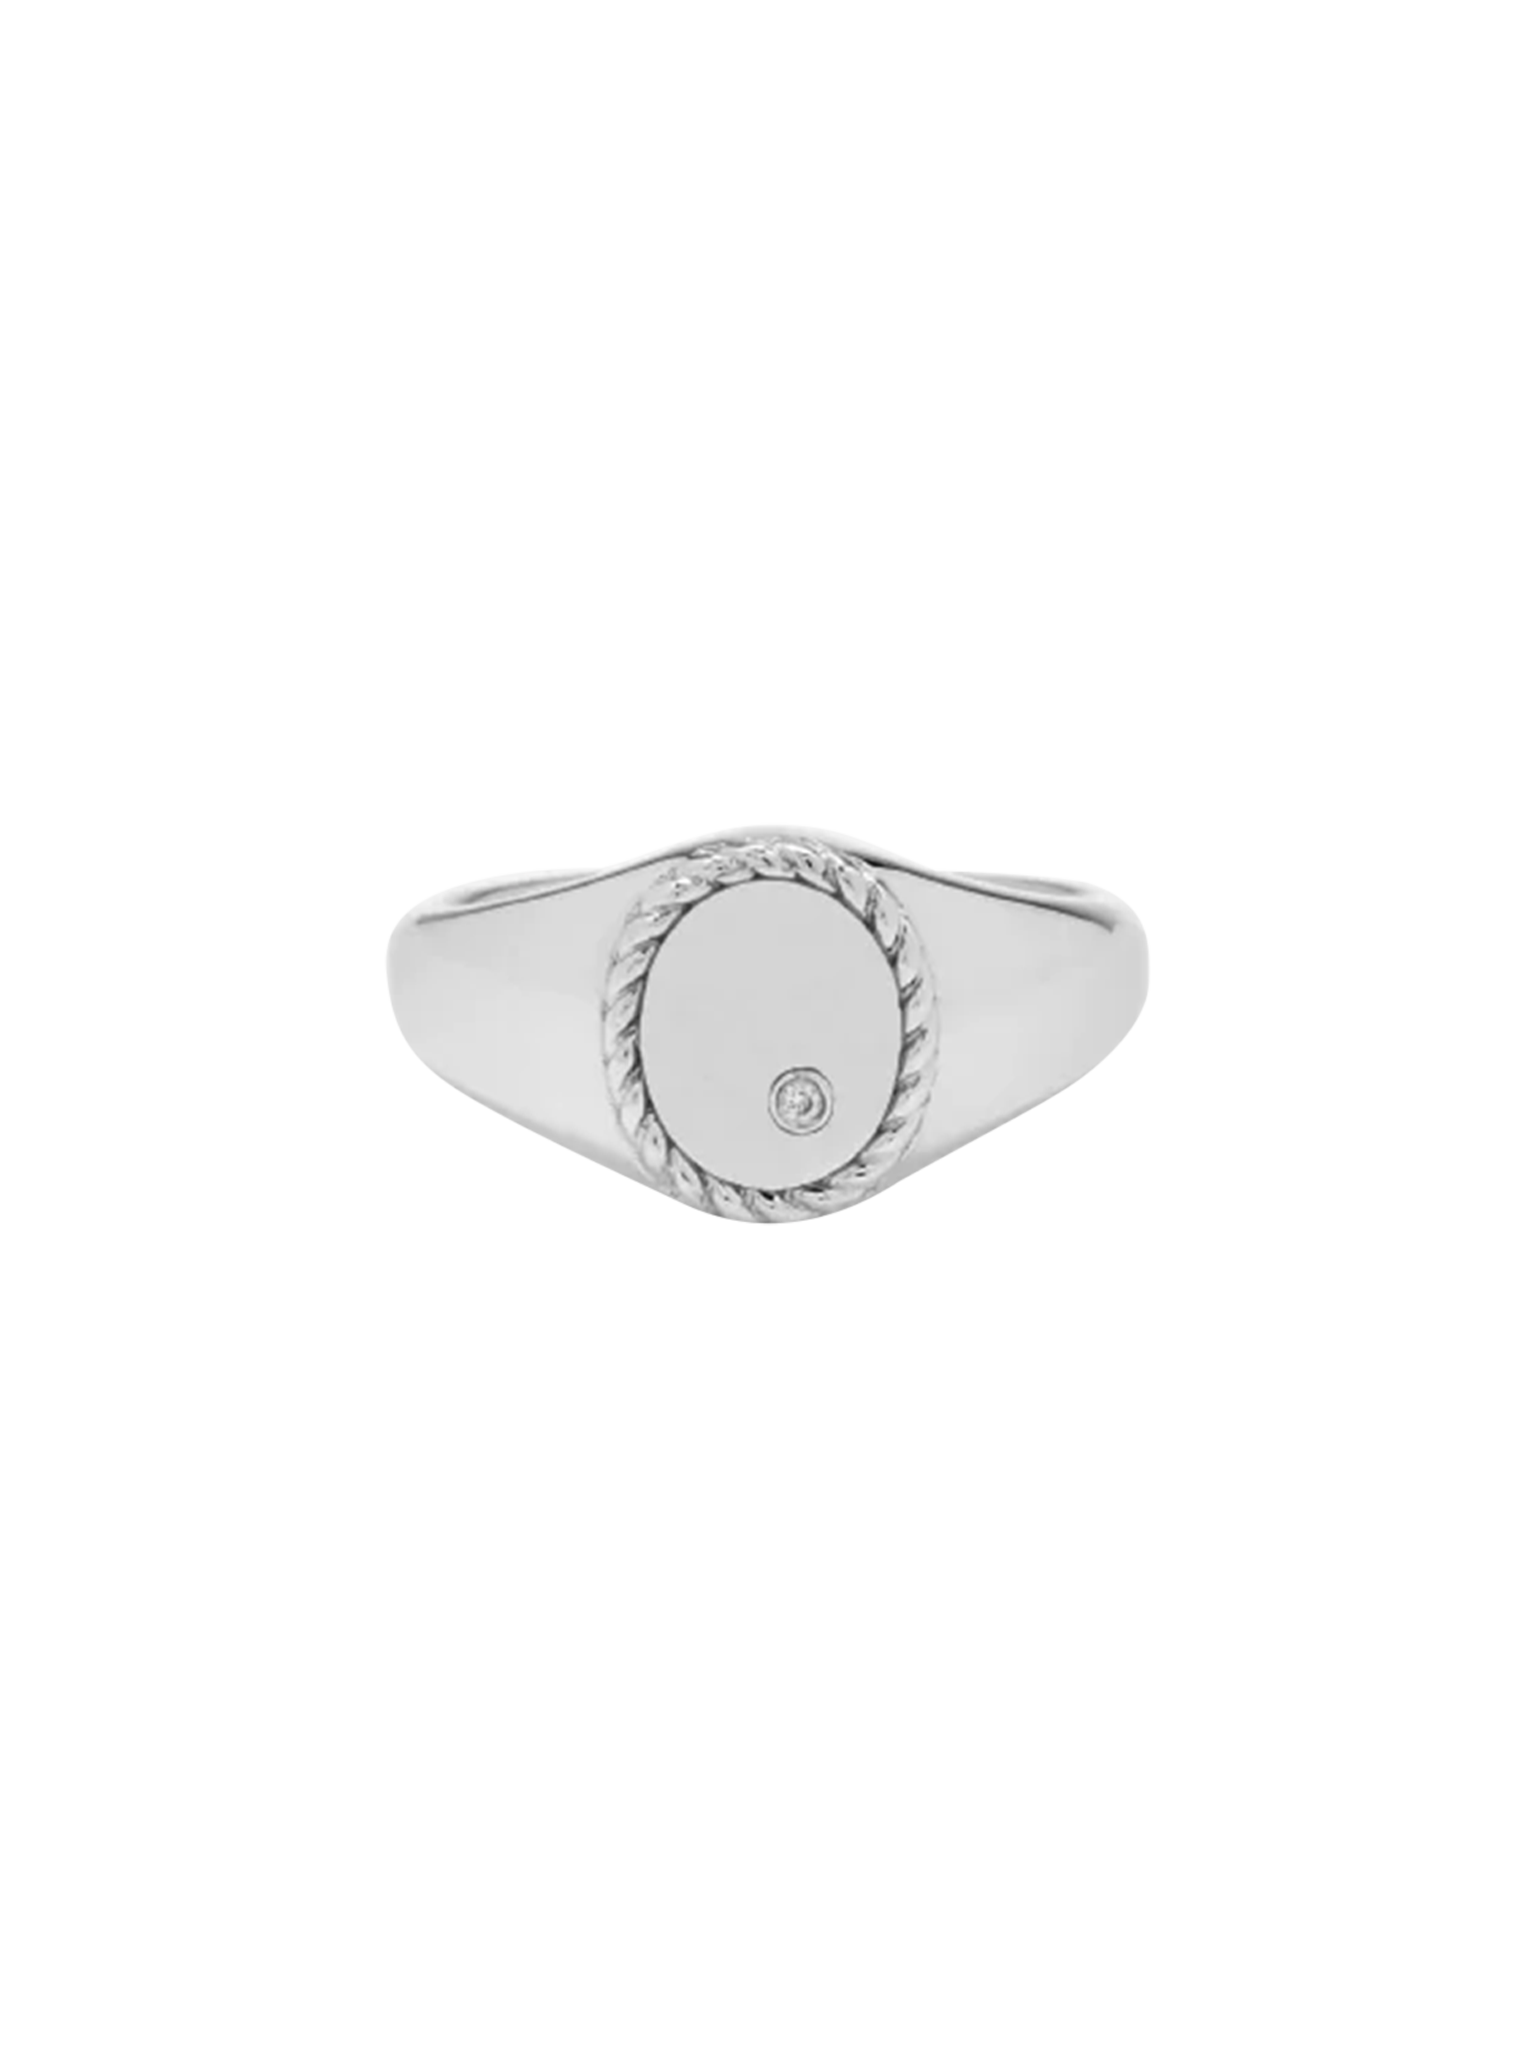 Baby chevalière ovale or blanc ring